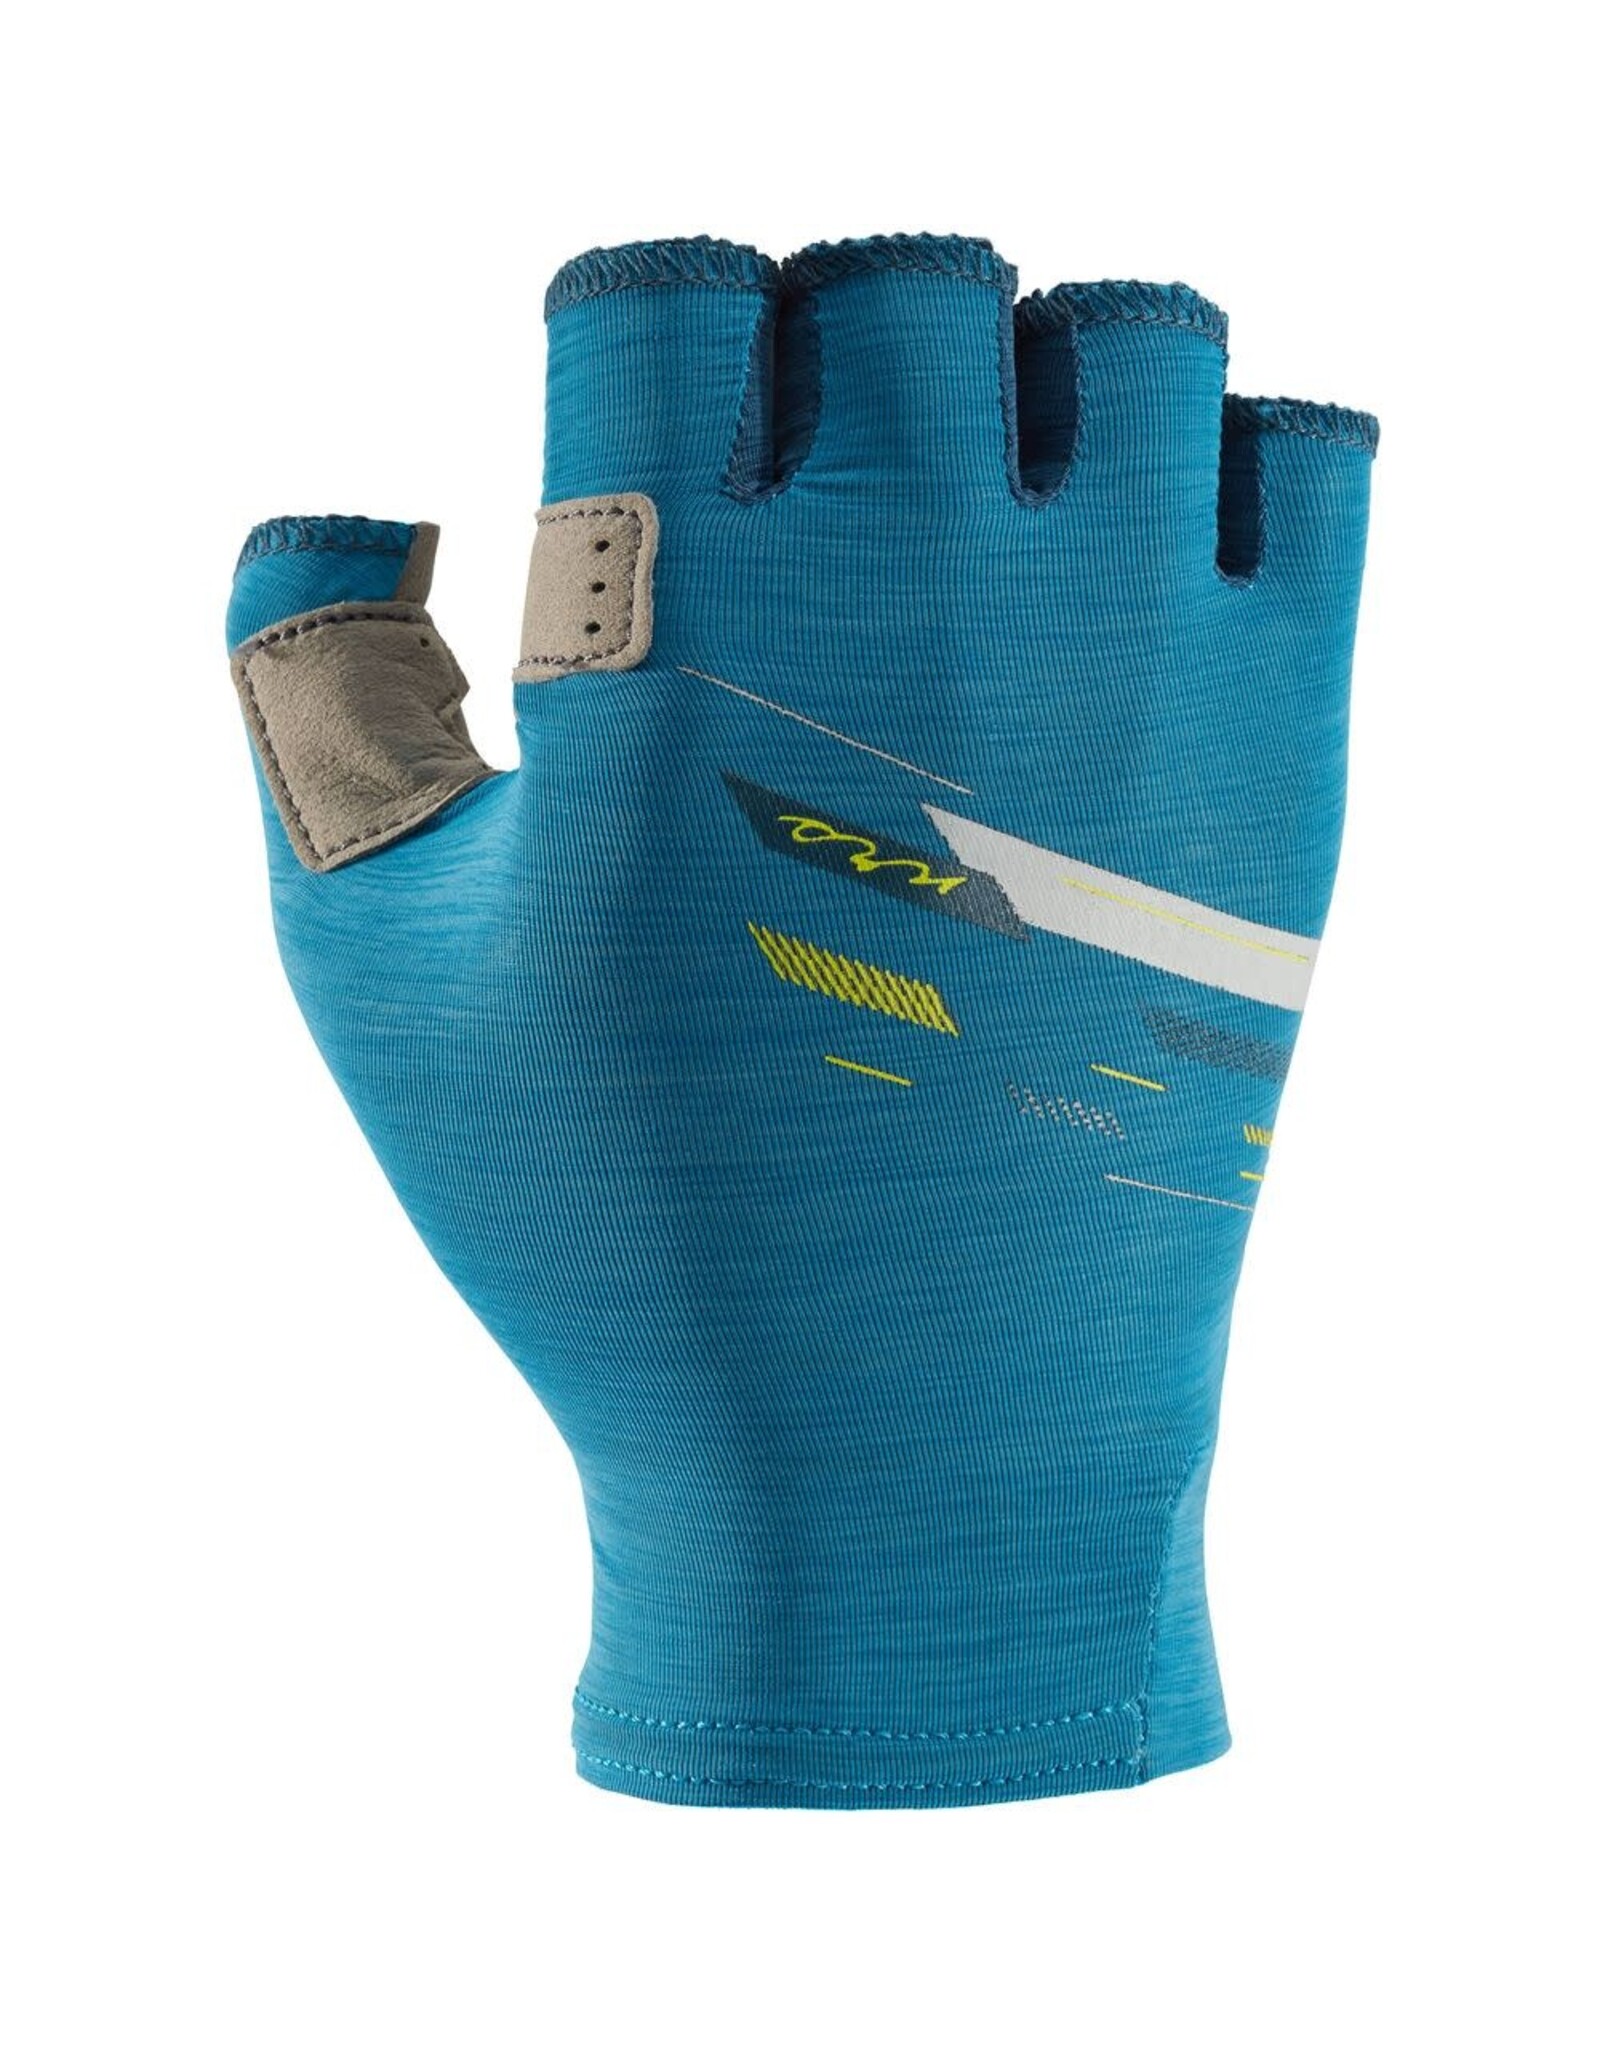 NRS NRS Boater's Women's Gloves UPF 50+ Fjord X-Large